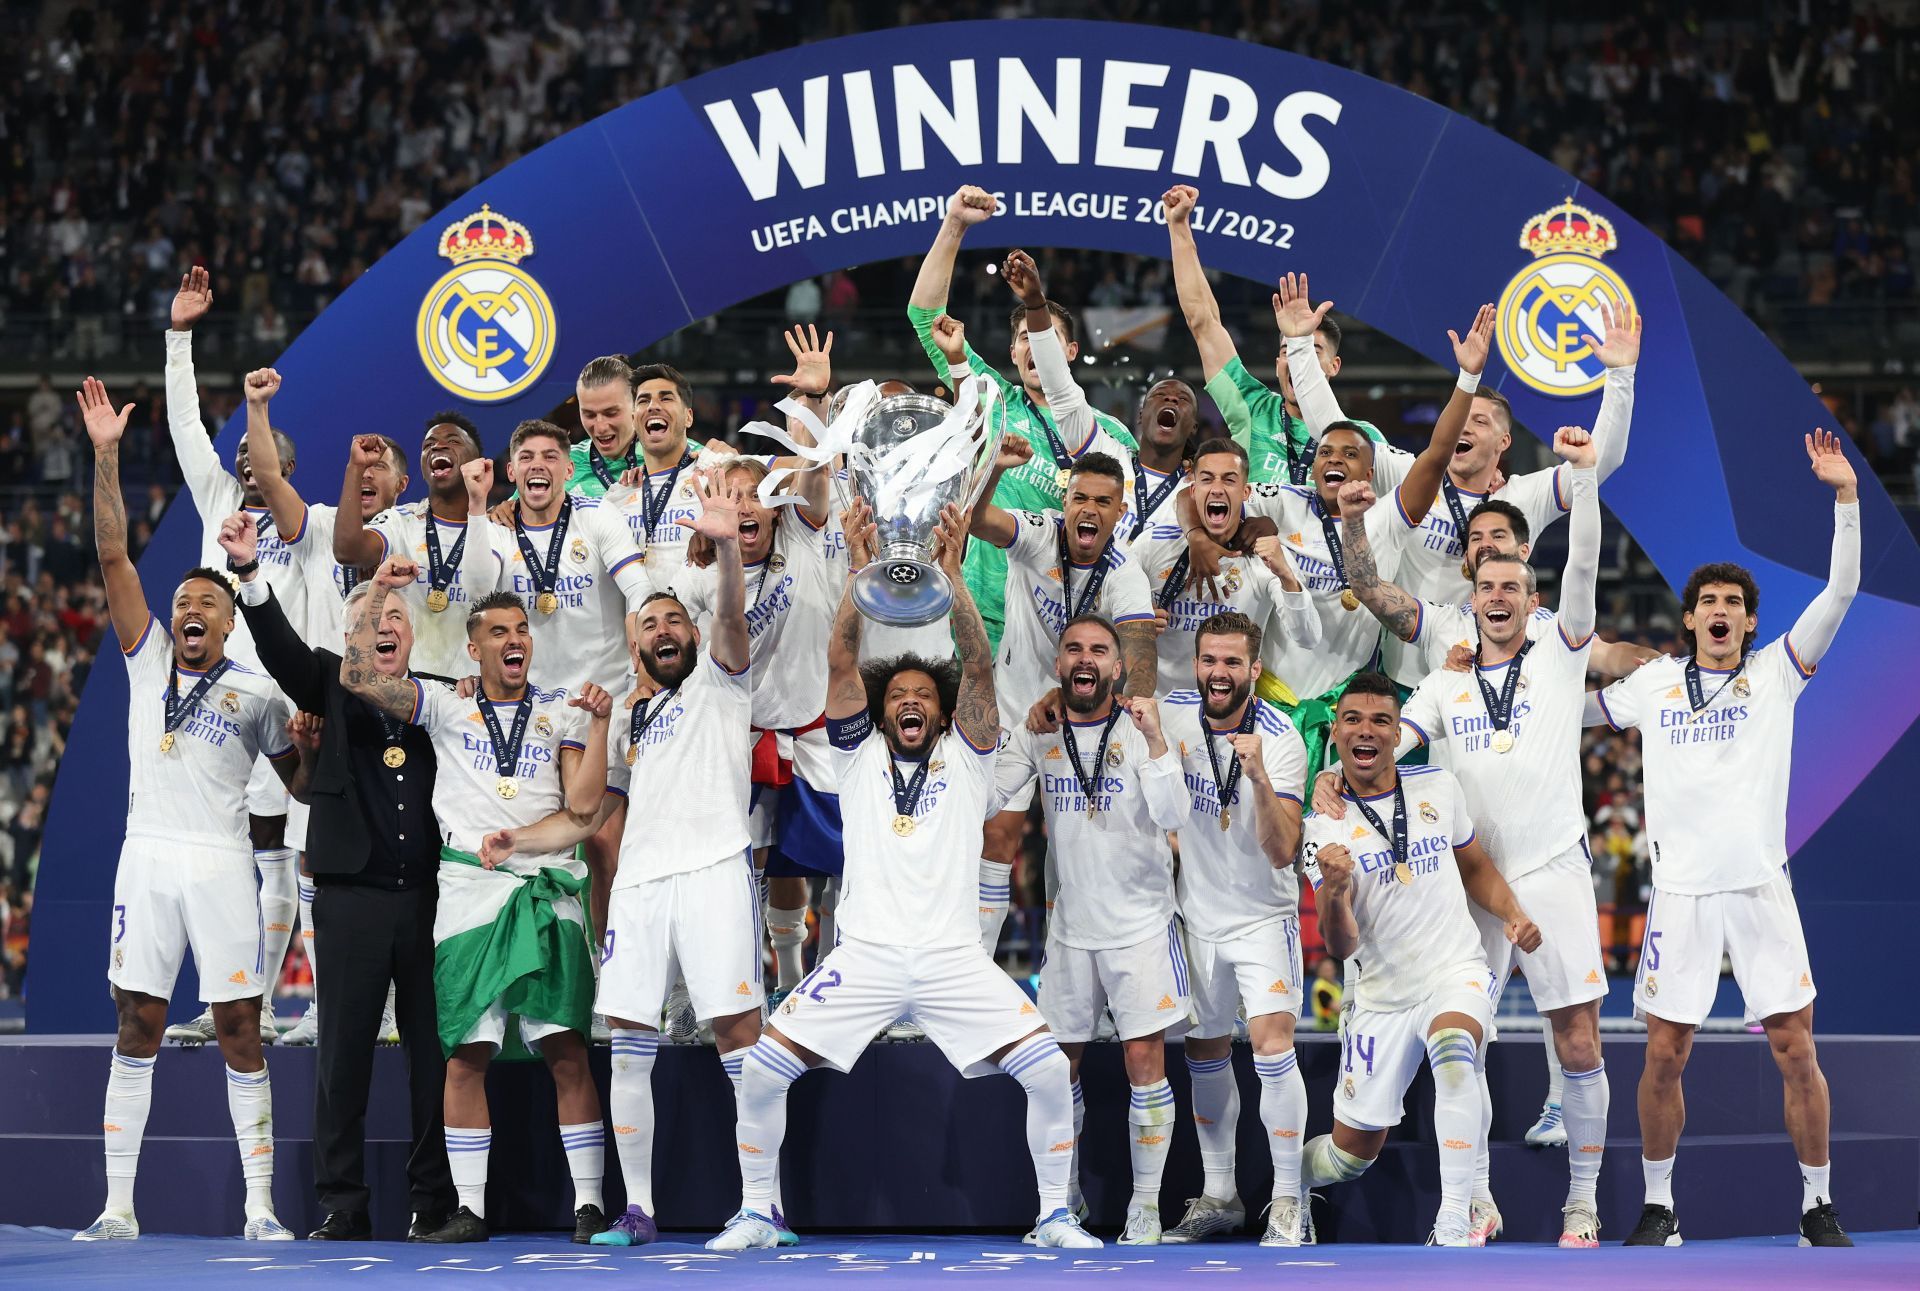 Real Madrid are champions of Europe yet again